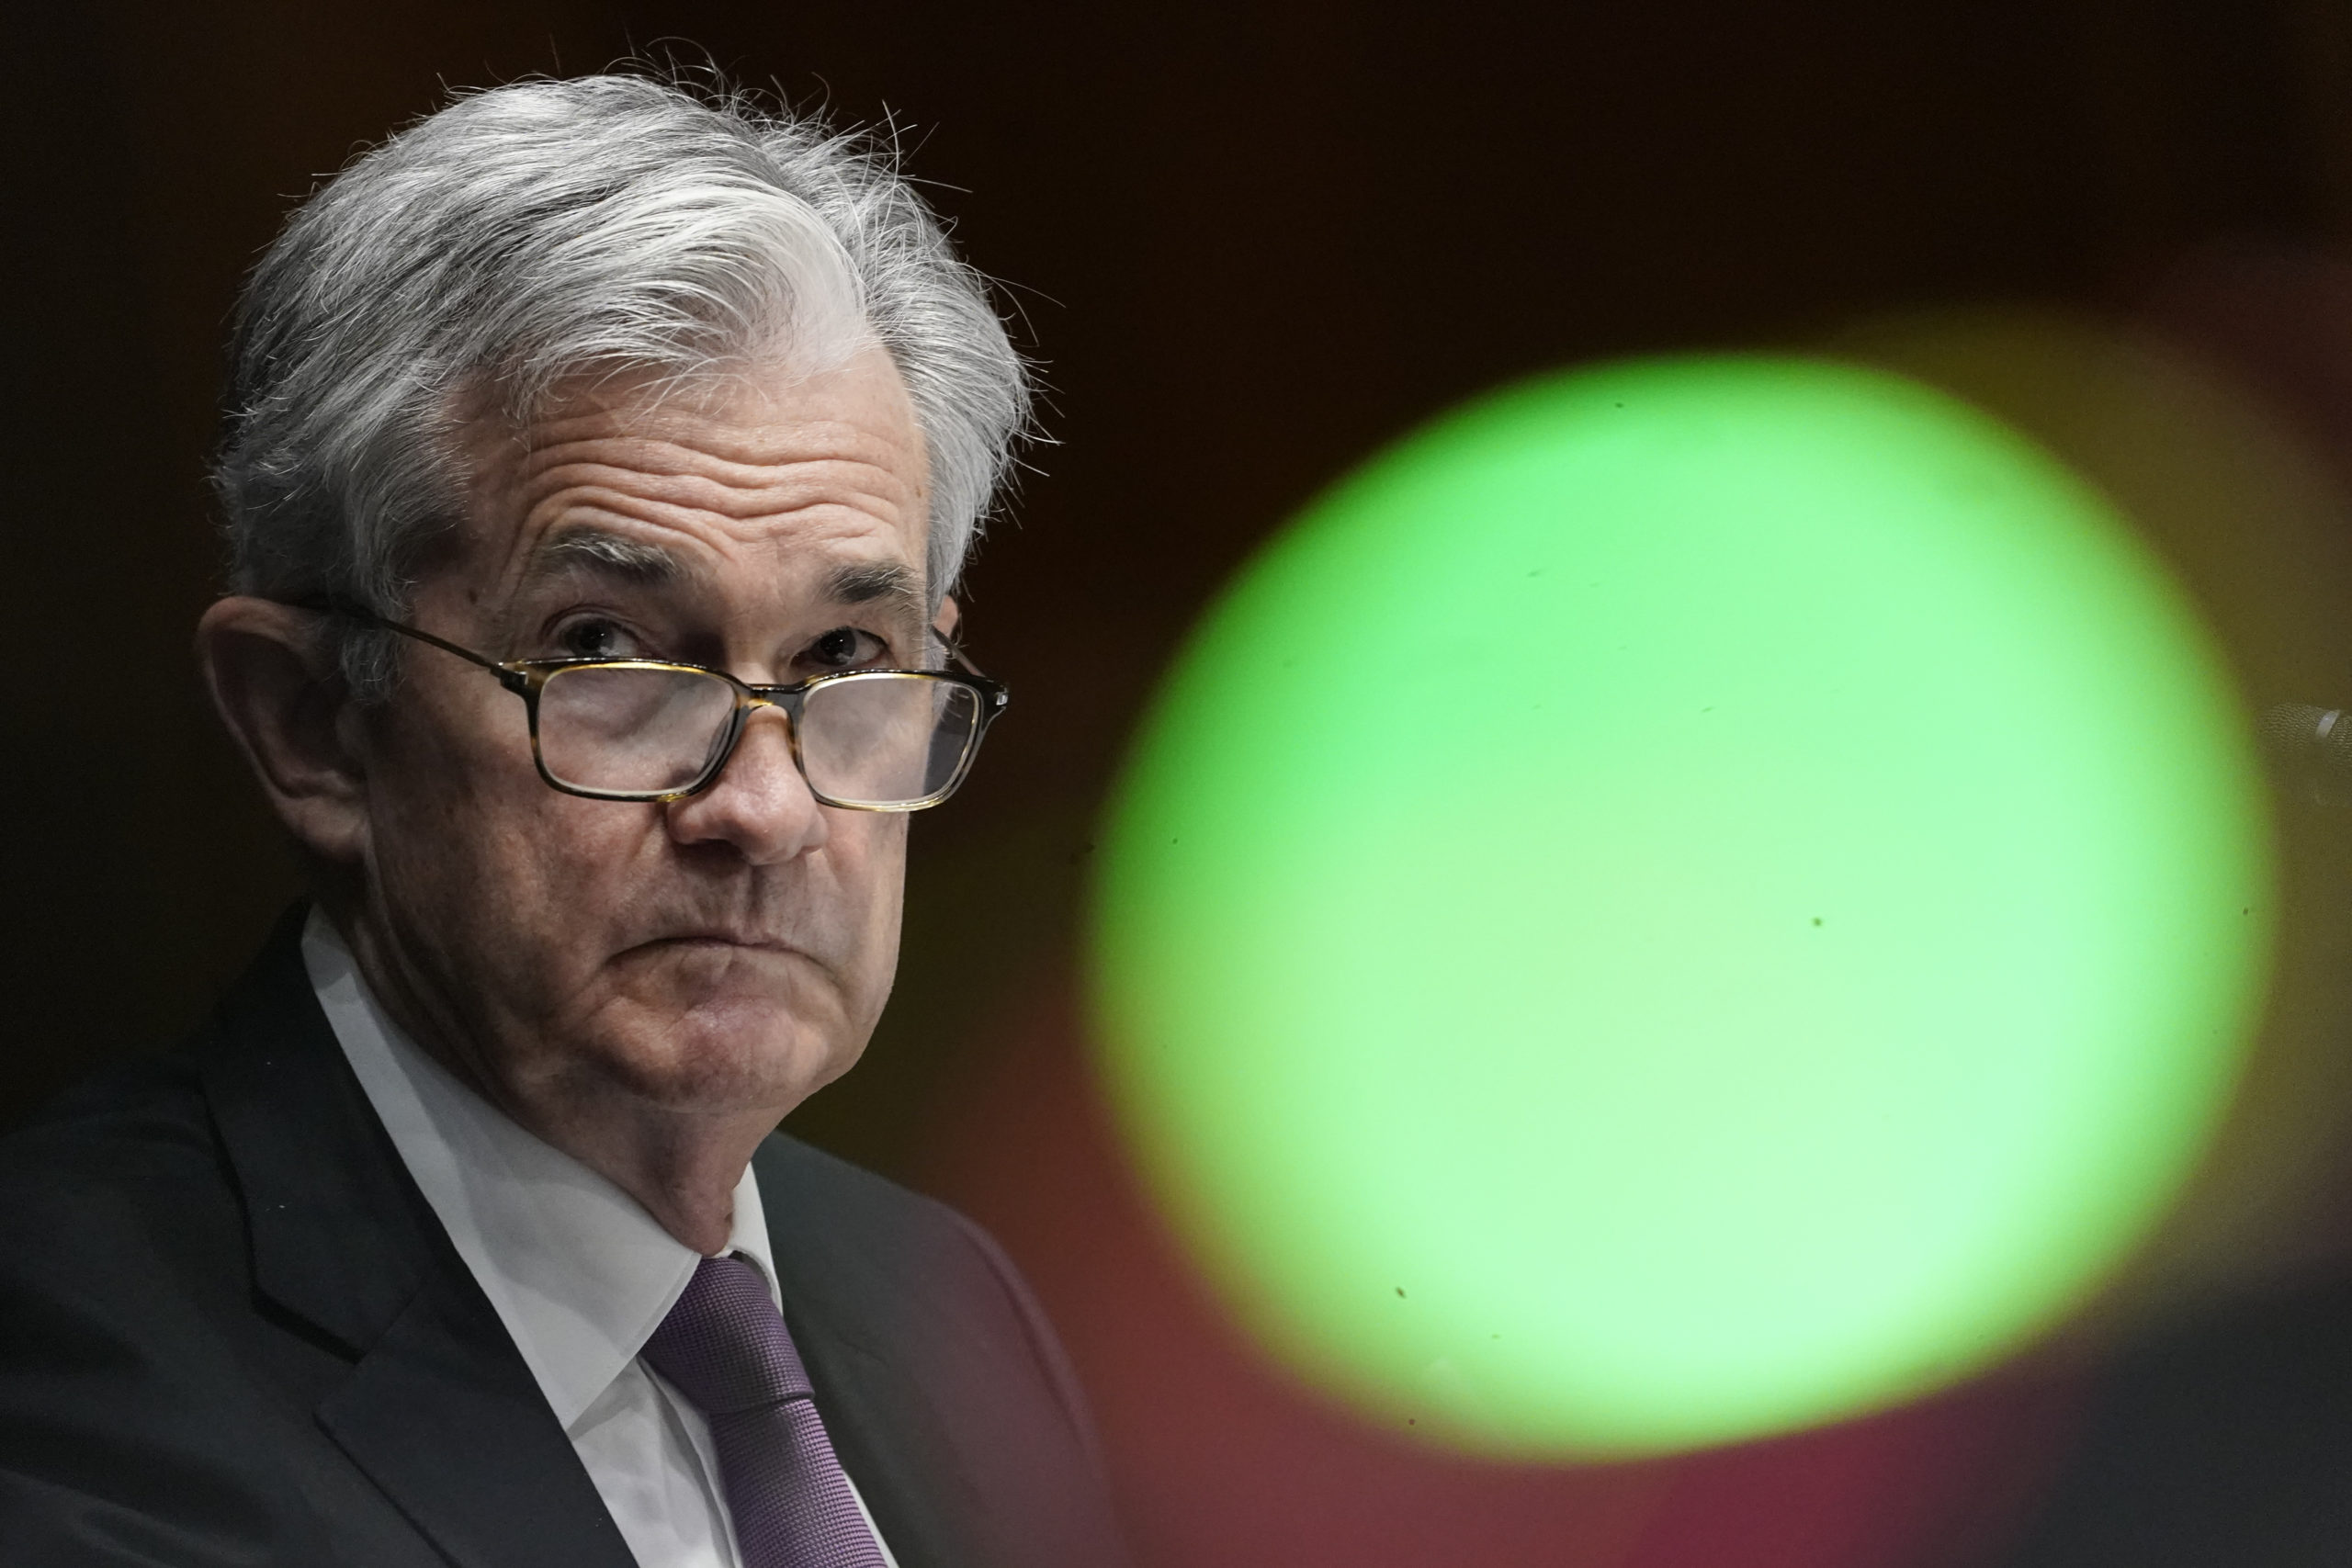 WASHINGTON, DC - SEPTEMBER 24: Federal Reserve Board Chairman Jerome Powell testifies during a Senate Banking Committee hearing on Capitol Hill on September 24, 2020 in Washington, DC. (Drew Angerer/Getty Images)